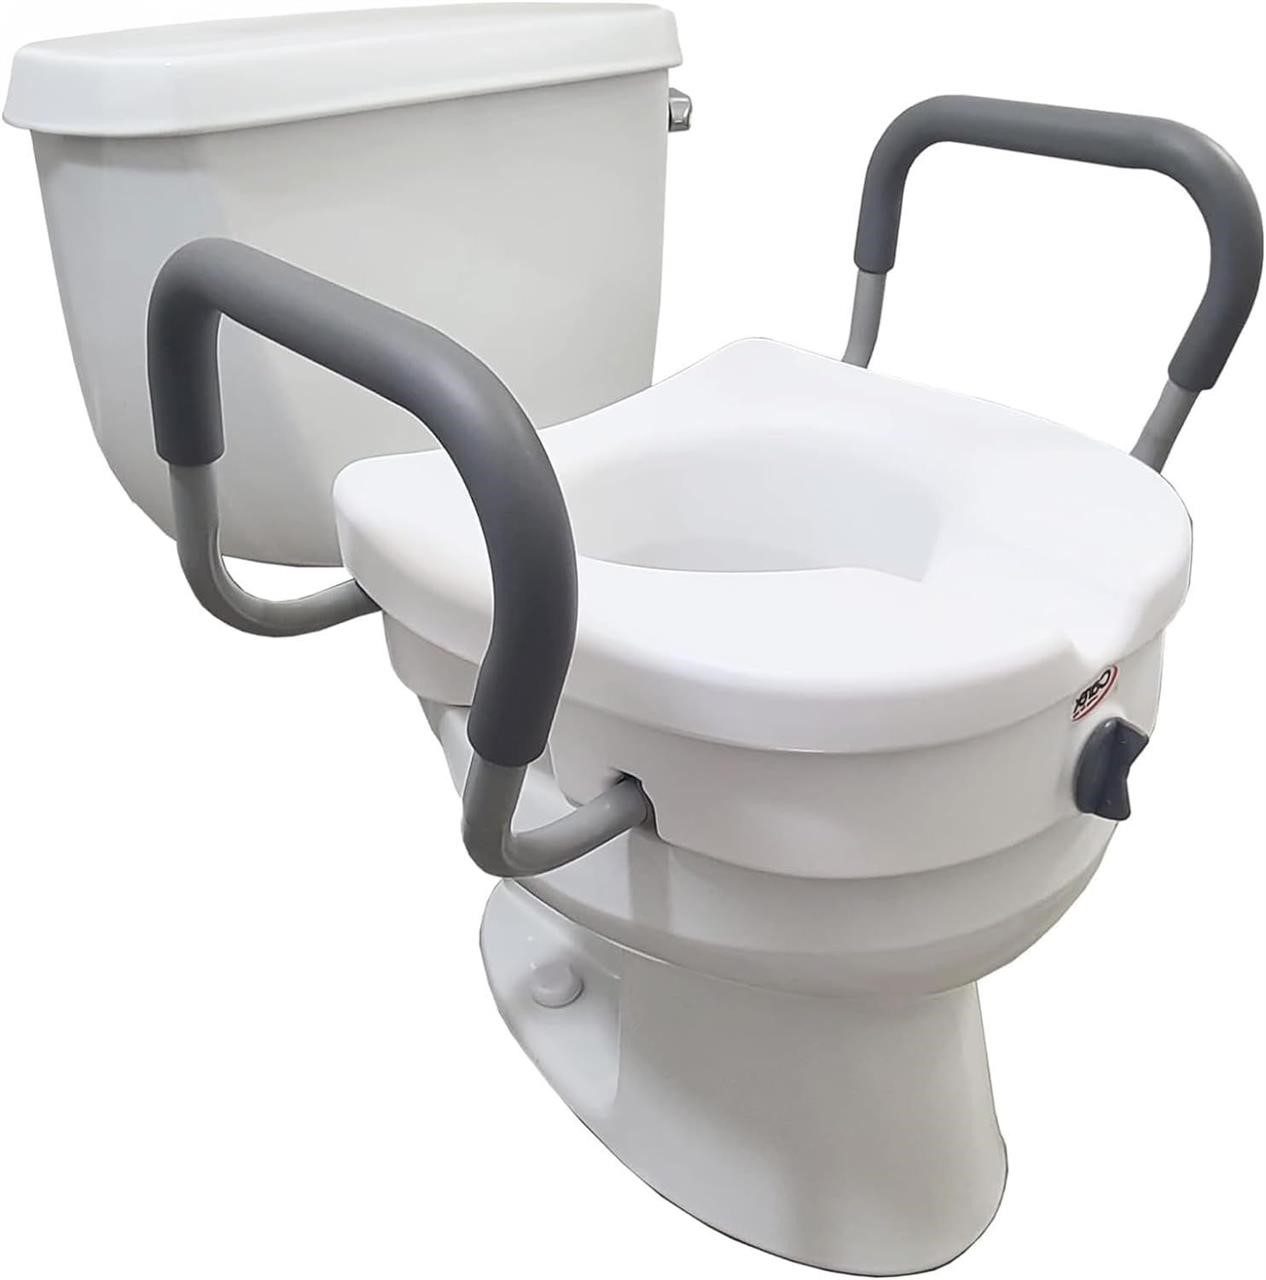 NEW $90 Raised Toilet Seat with Handles